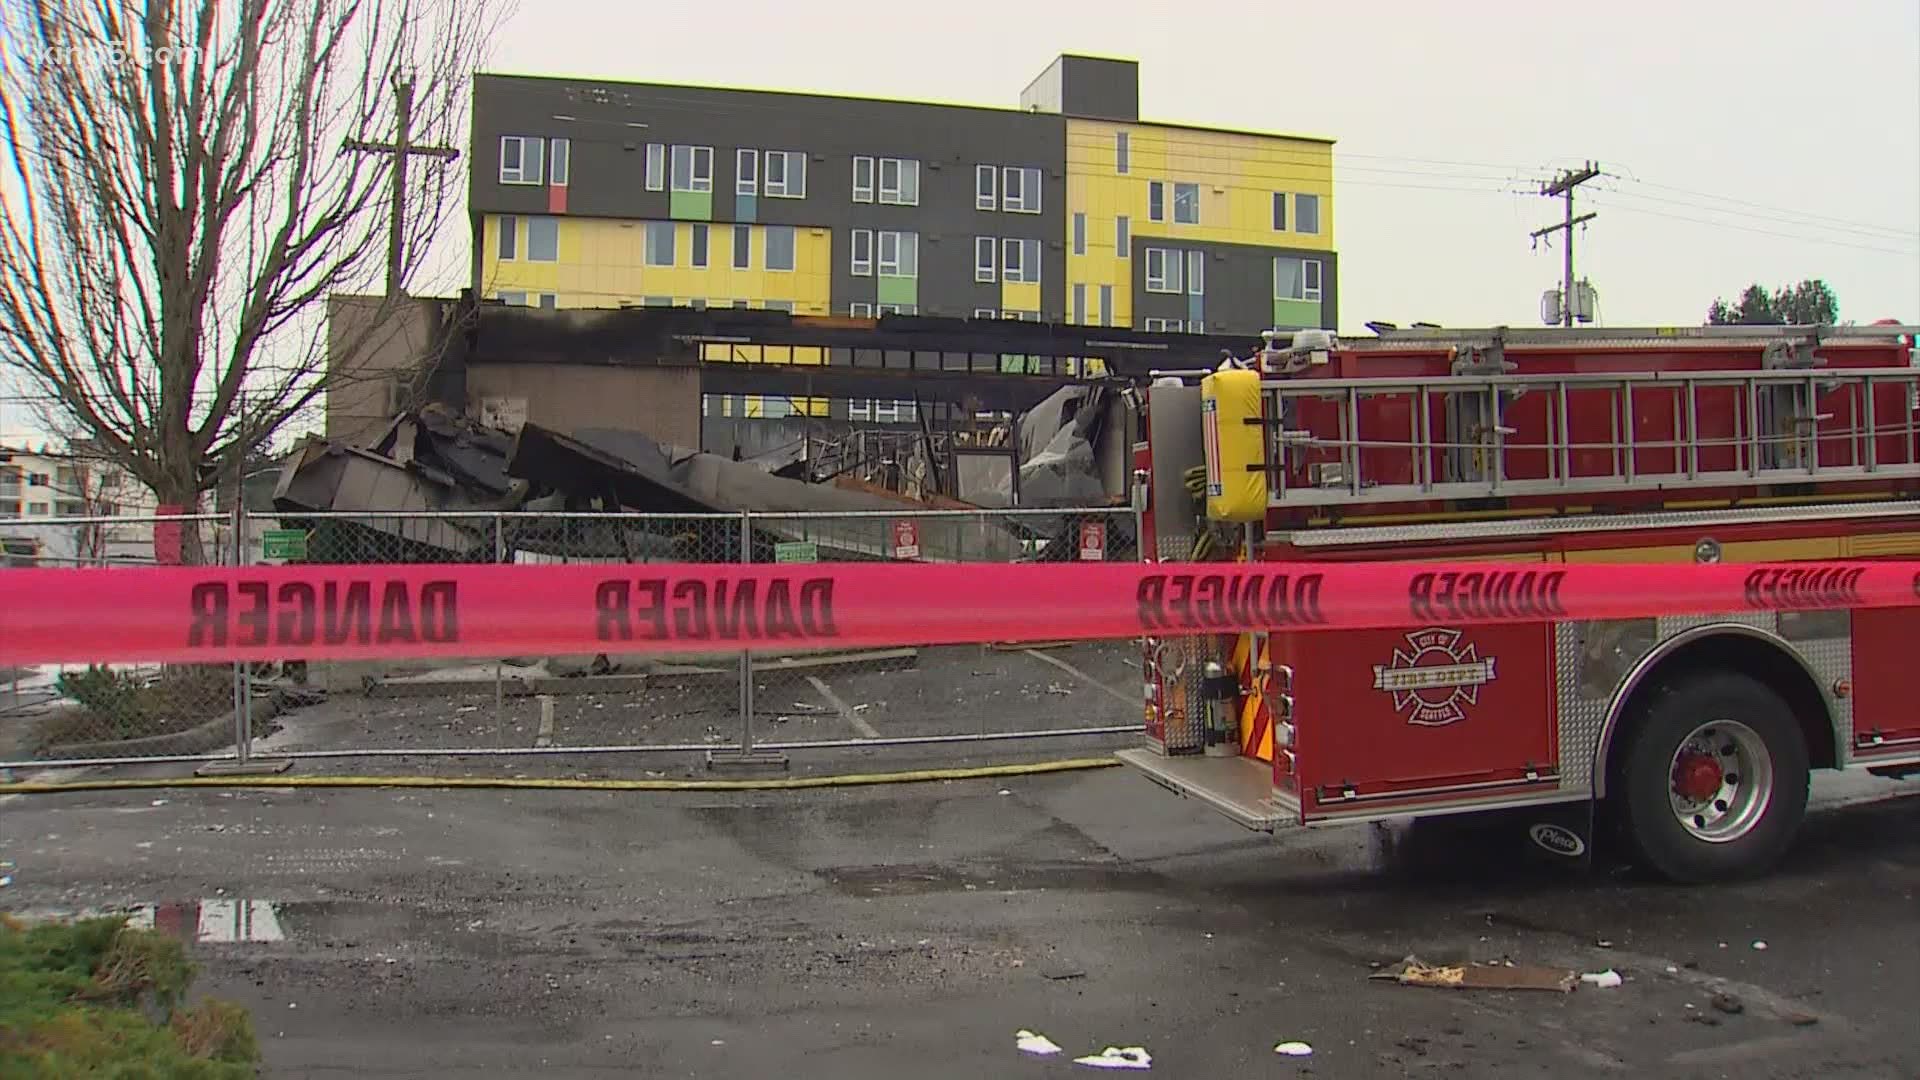 Seattle police said a caller reported seeing people flee after a break-in at a Lake City strip mall just before a two-alarm fire broke out.